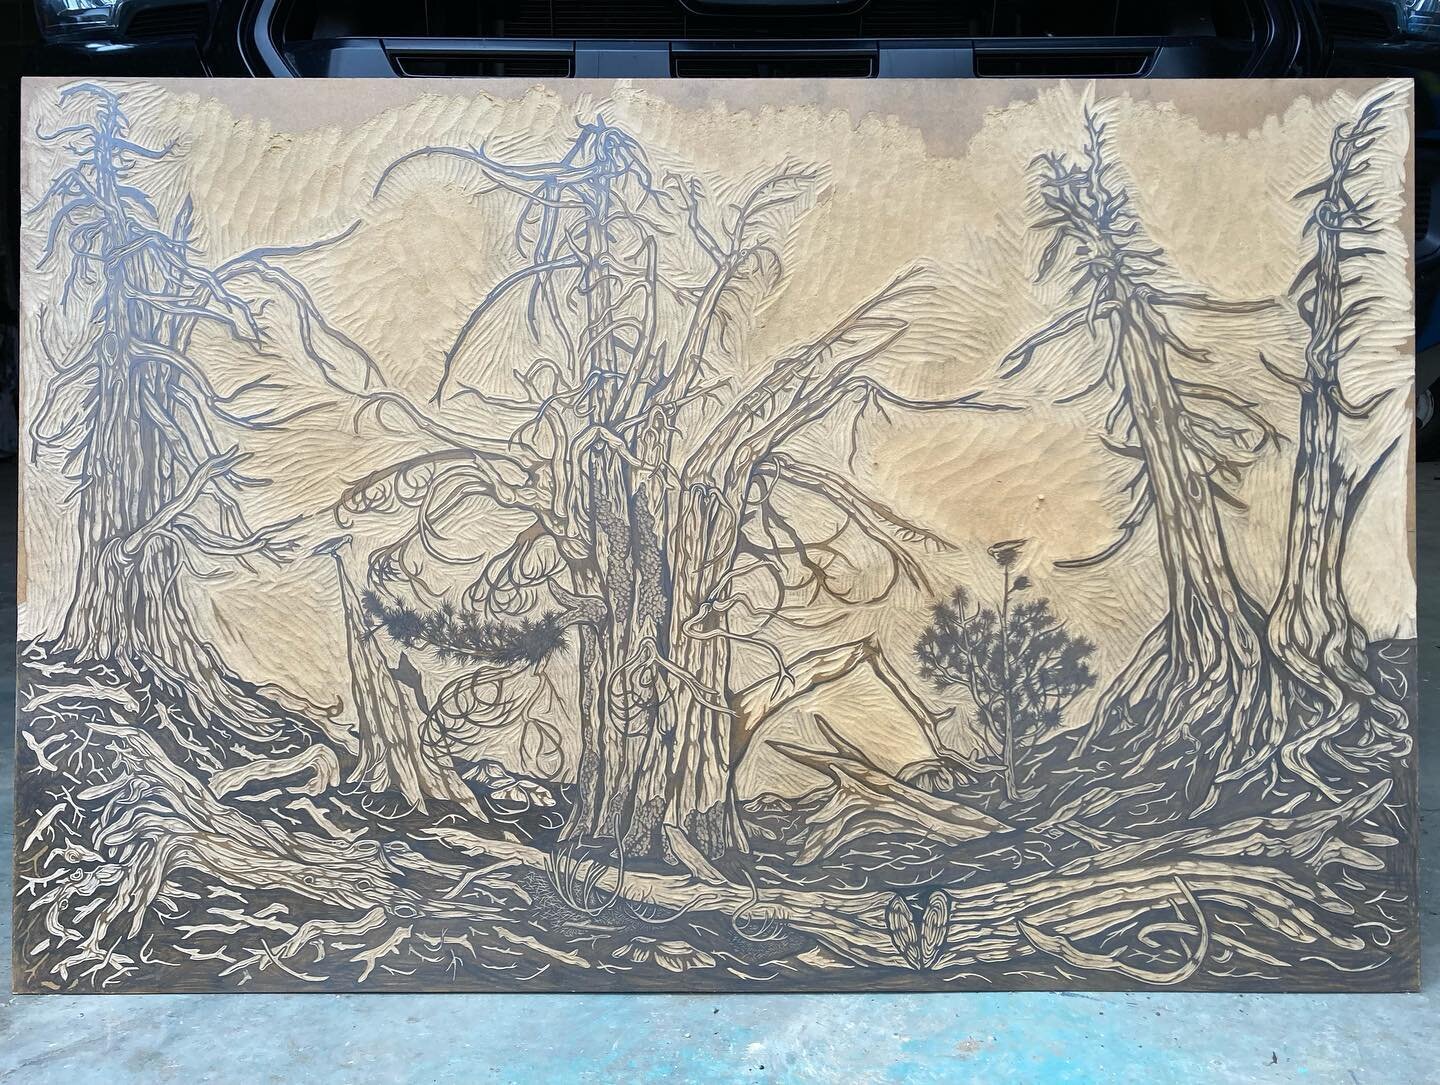 Finished a new whitebark pine block for an upcoming steam roller event in Jackson Hole.  A dying keystone in the Rockies on the edge.  B&amp;W &amp; color to come&hellip;&rdquo;31x49&rdquo;

#printmaking #woodcut #whitebarkpine